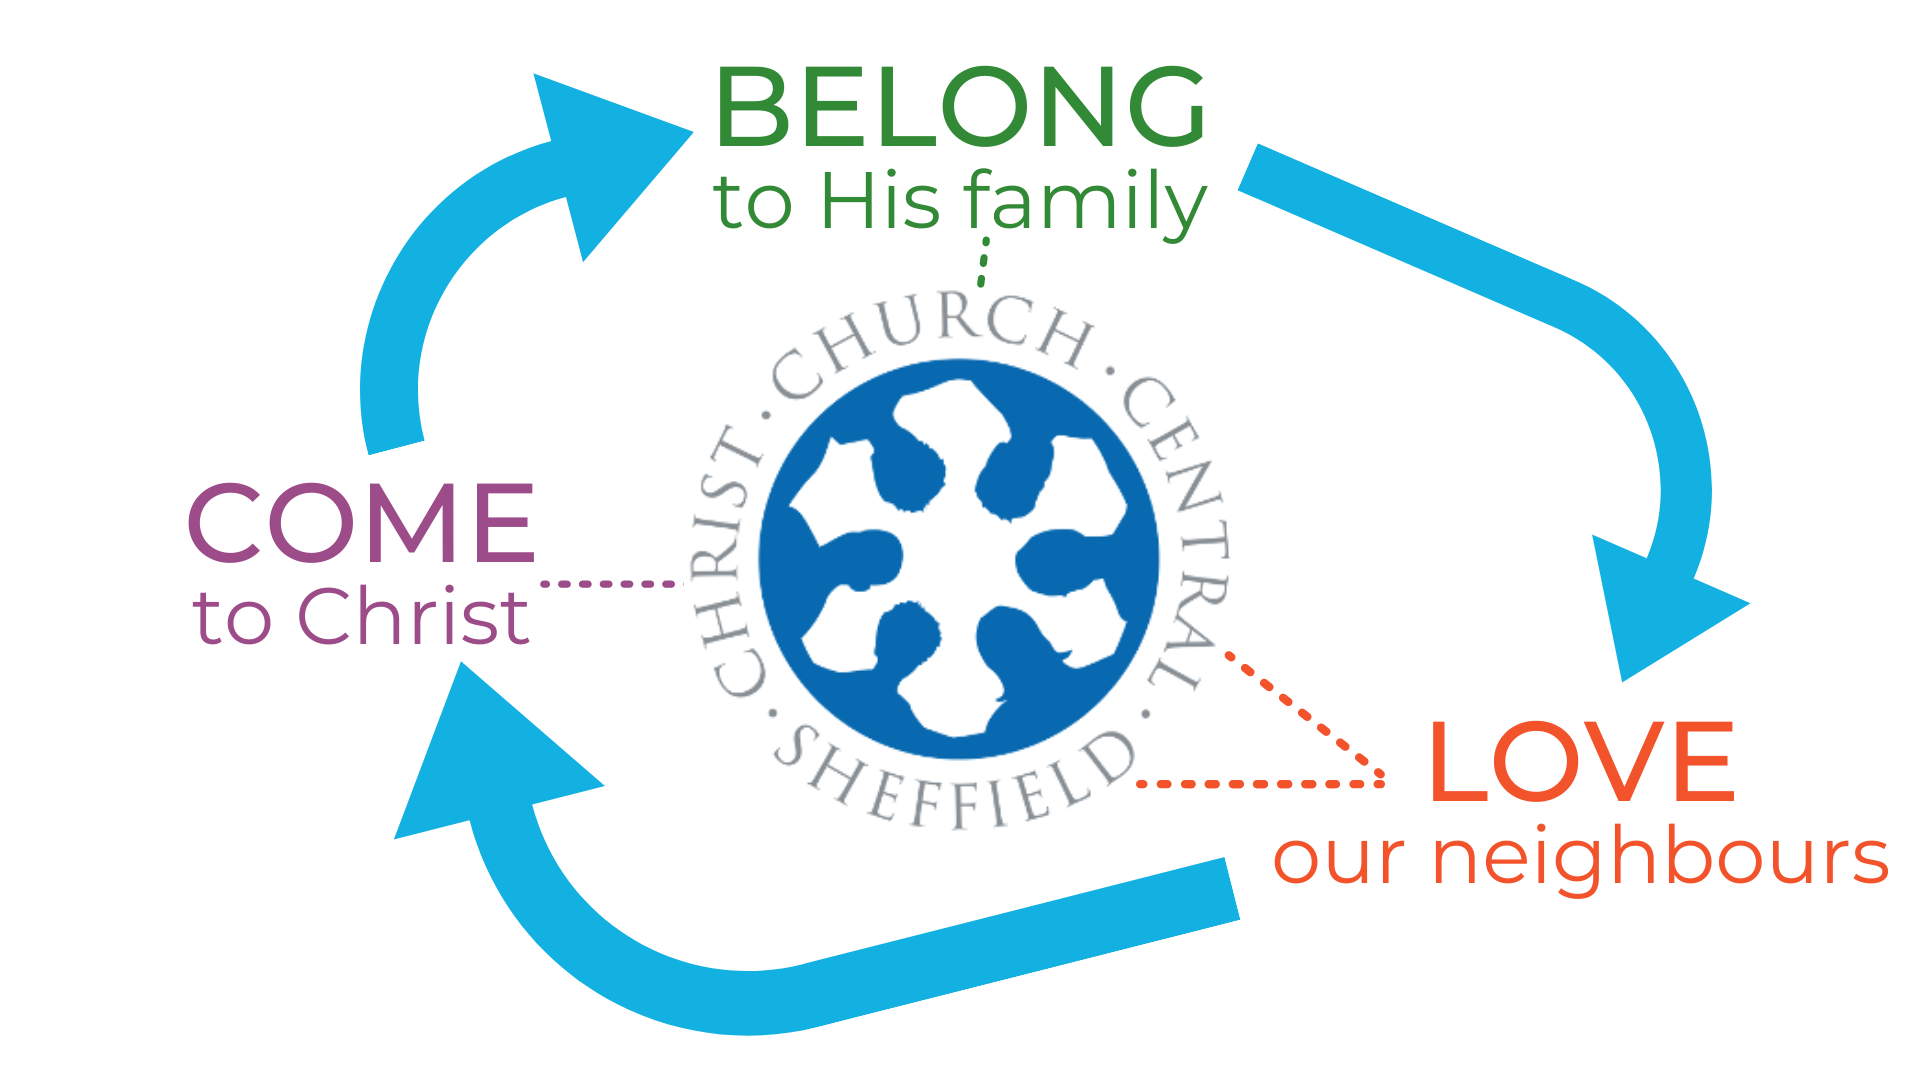 COME to Christ, BELONG to his family, LOVE our neighbours